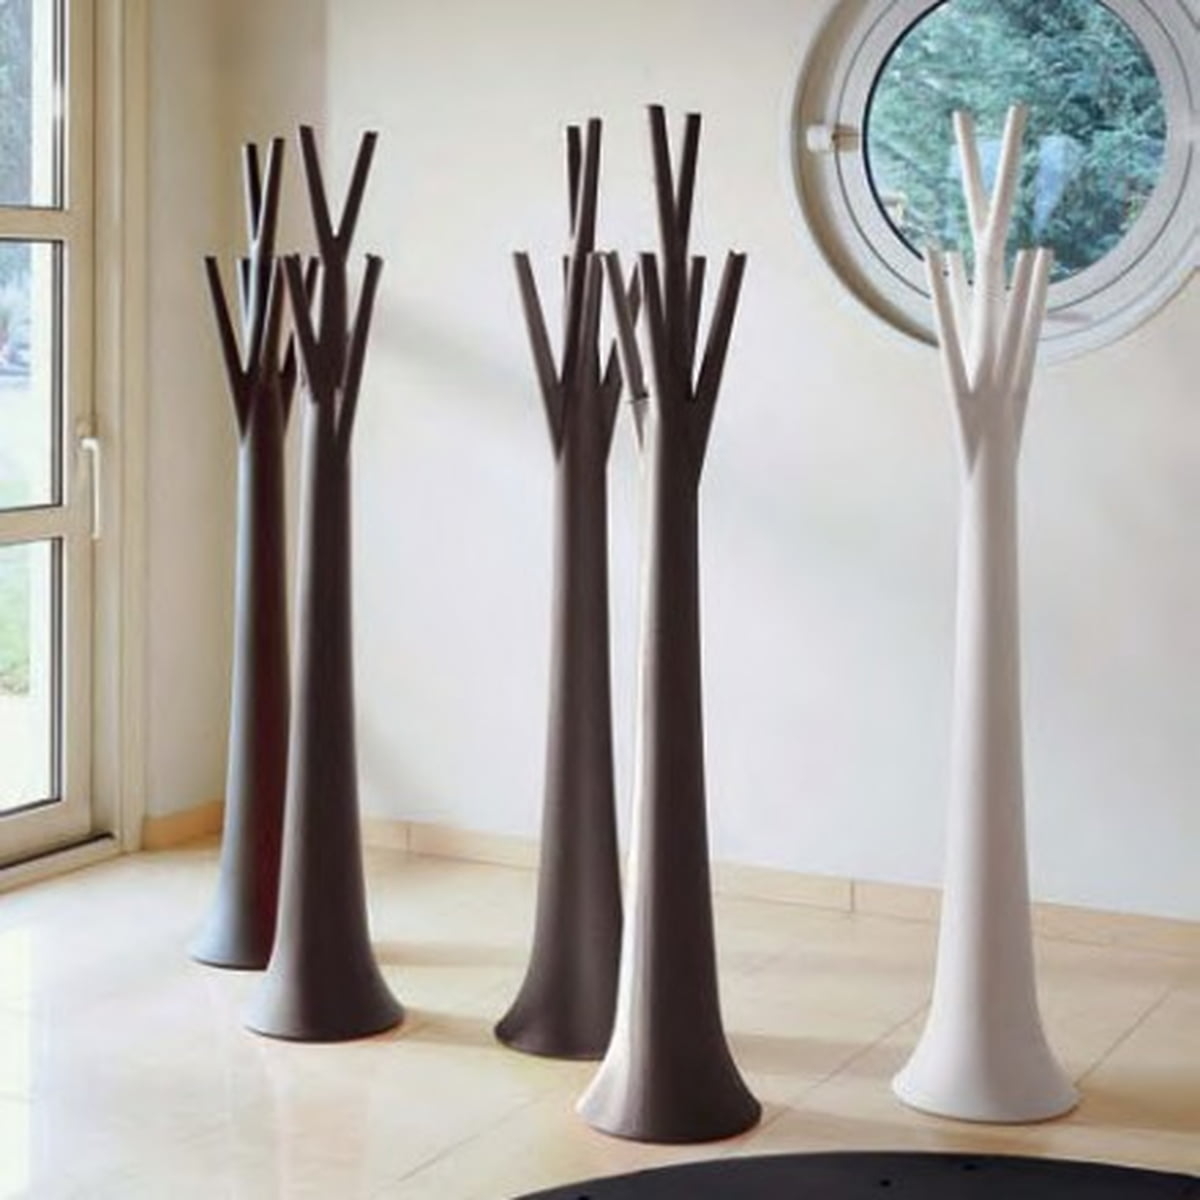 The tree coat stand was designed by mario mazzer for